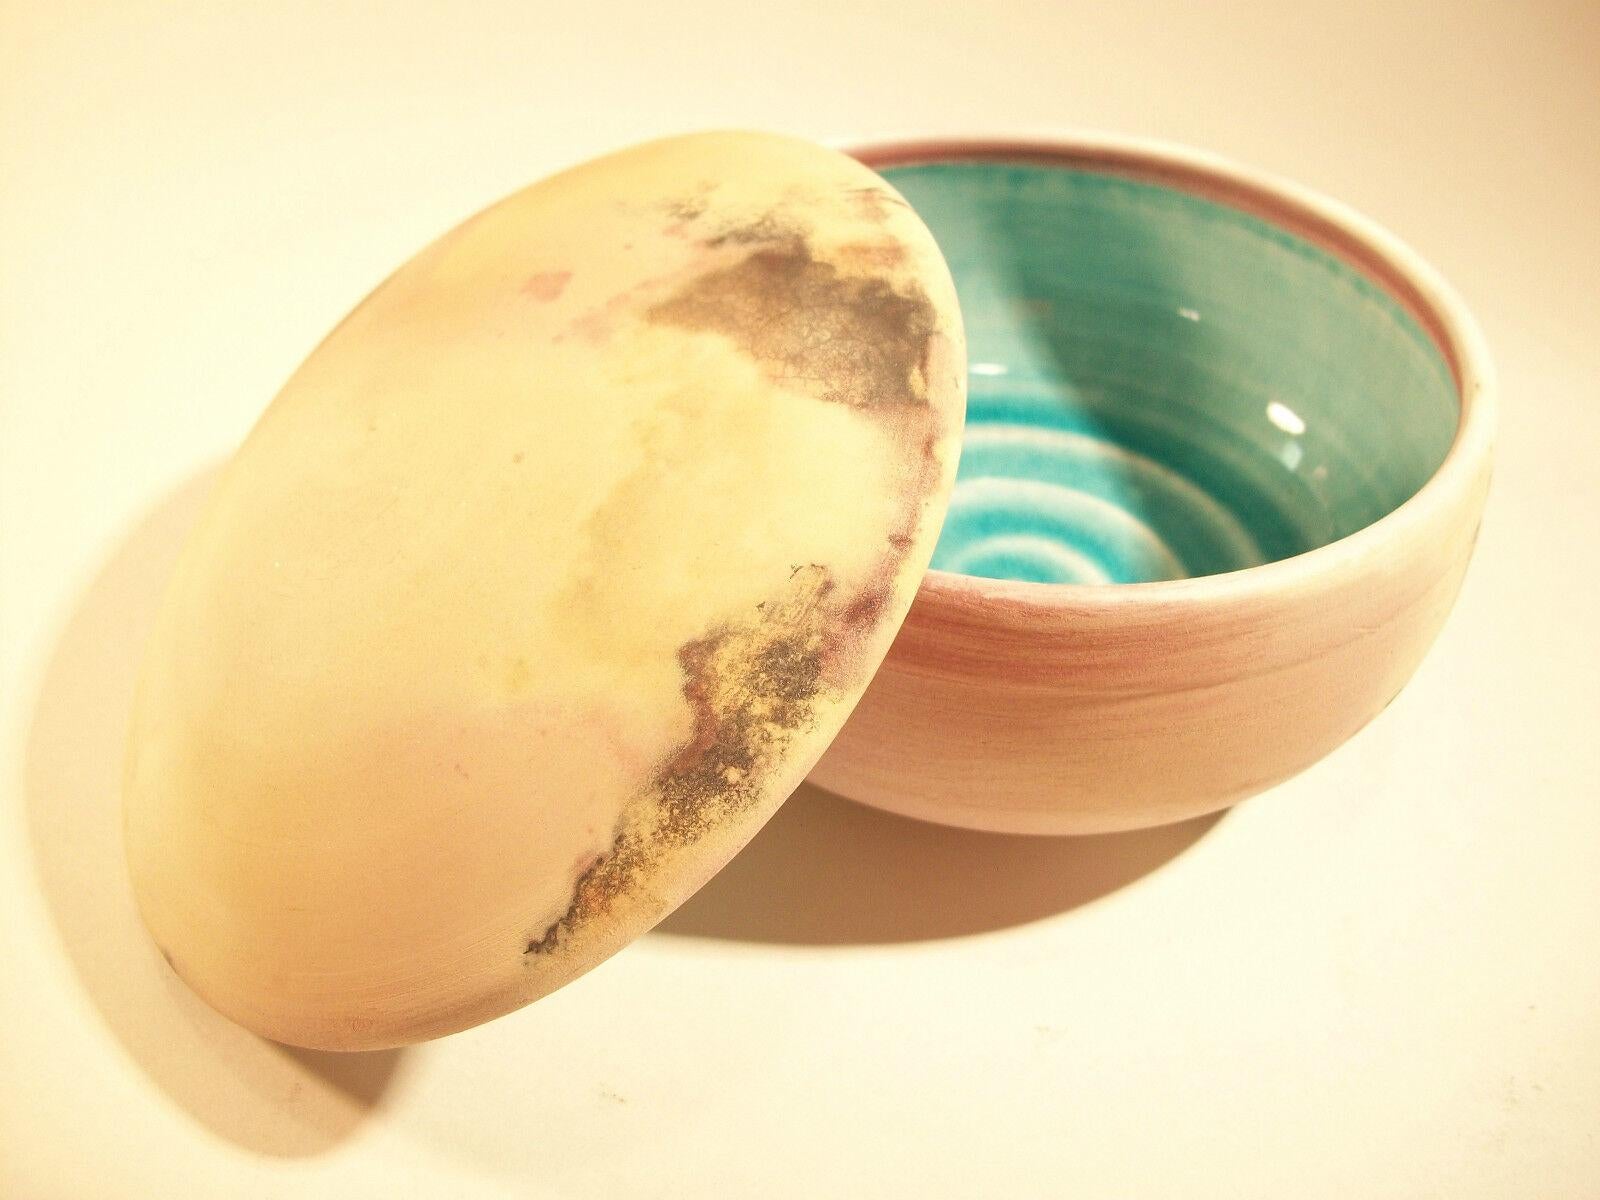 GLOVER - Vintage wheel thrown studio pottery dome lidded smoked raku box - unglazed exterior - bright turquoise glaze to the interior - signed on the base - circa 1980's.

Excellent vintage condition - minor chips to the inside rim of the lid (as